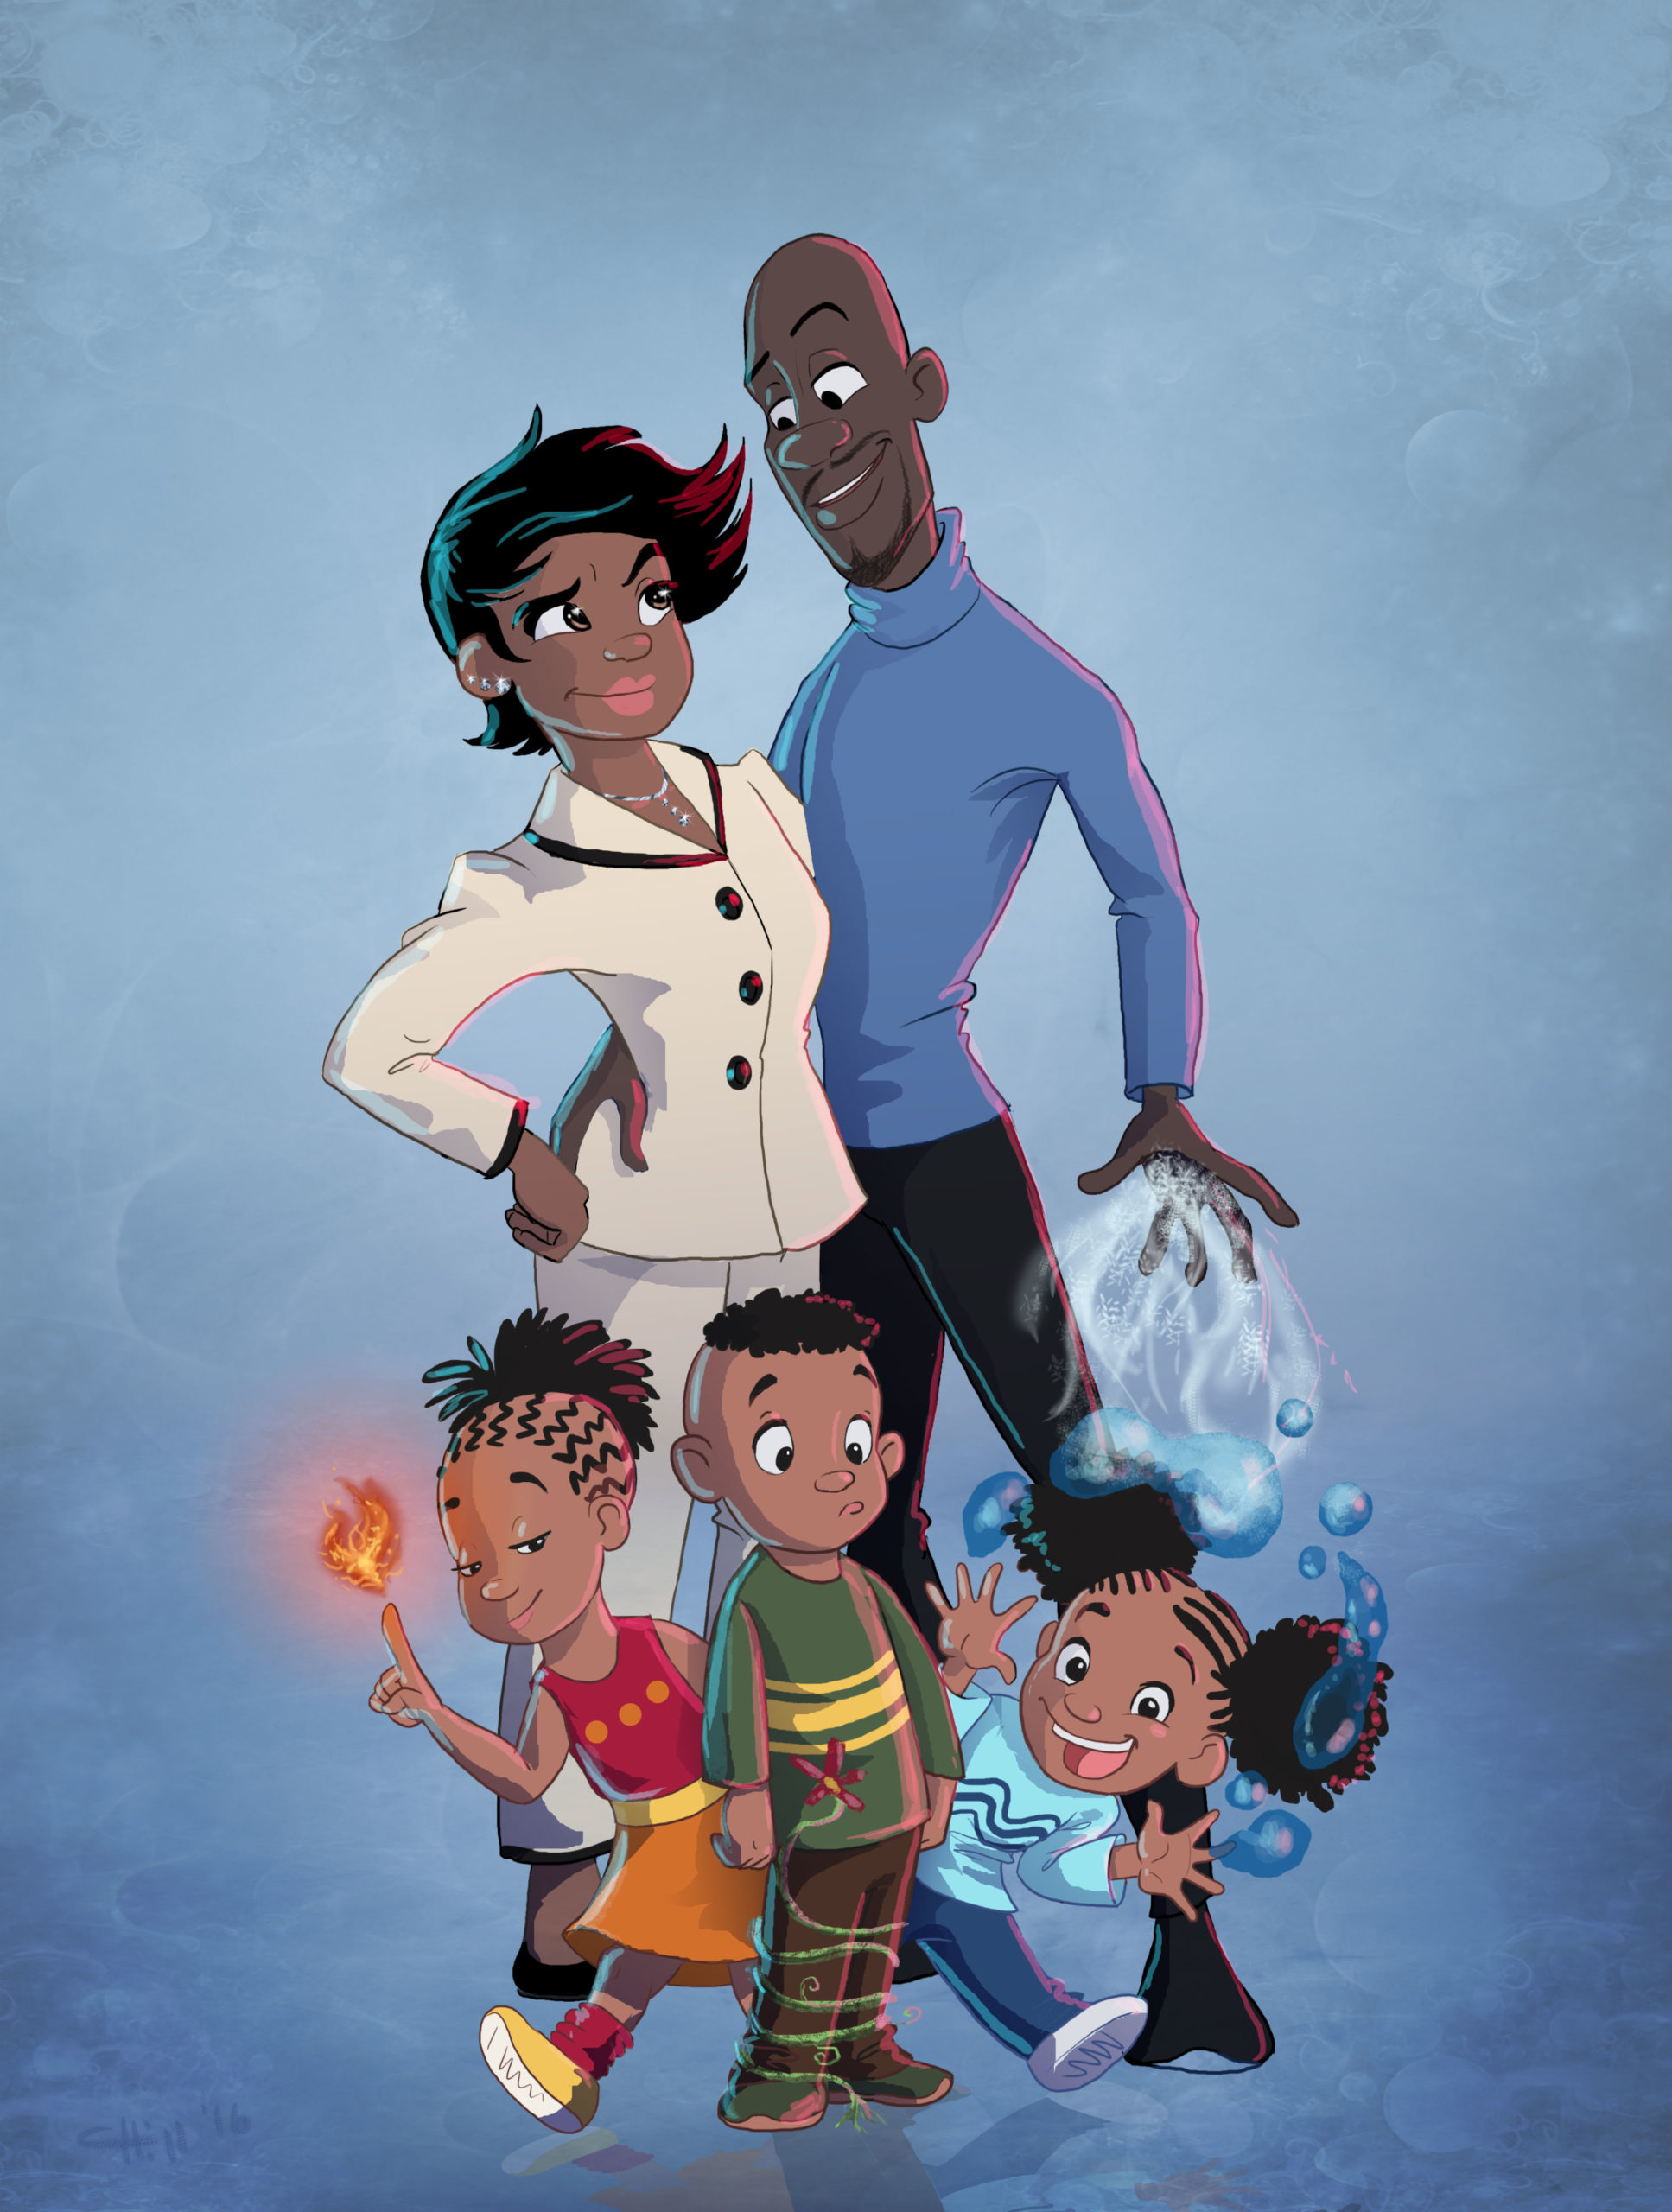 Frozone’s Wife And Kids Come To Life In This Incredibles Fan Art